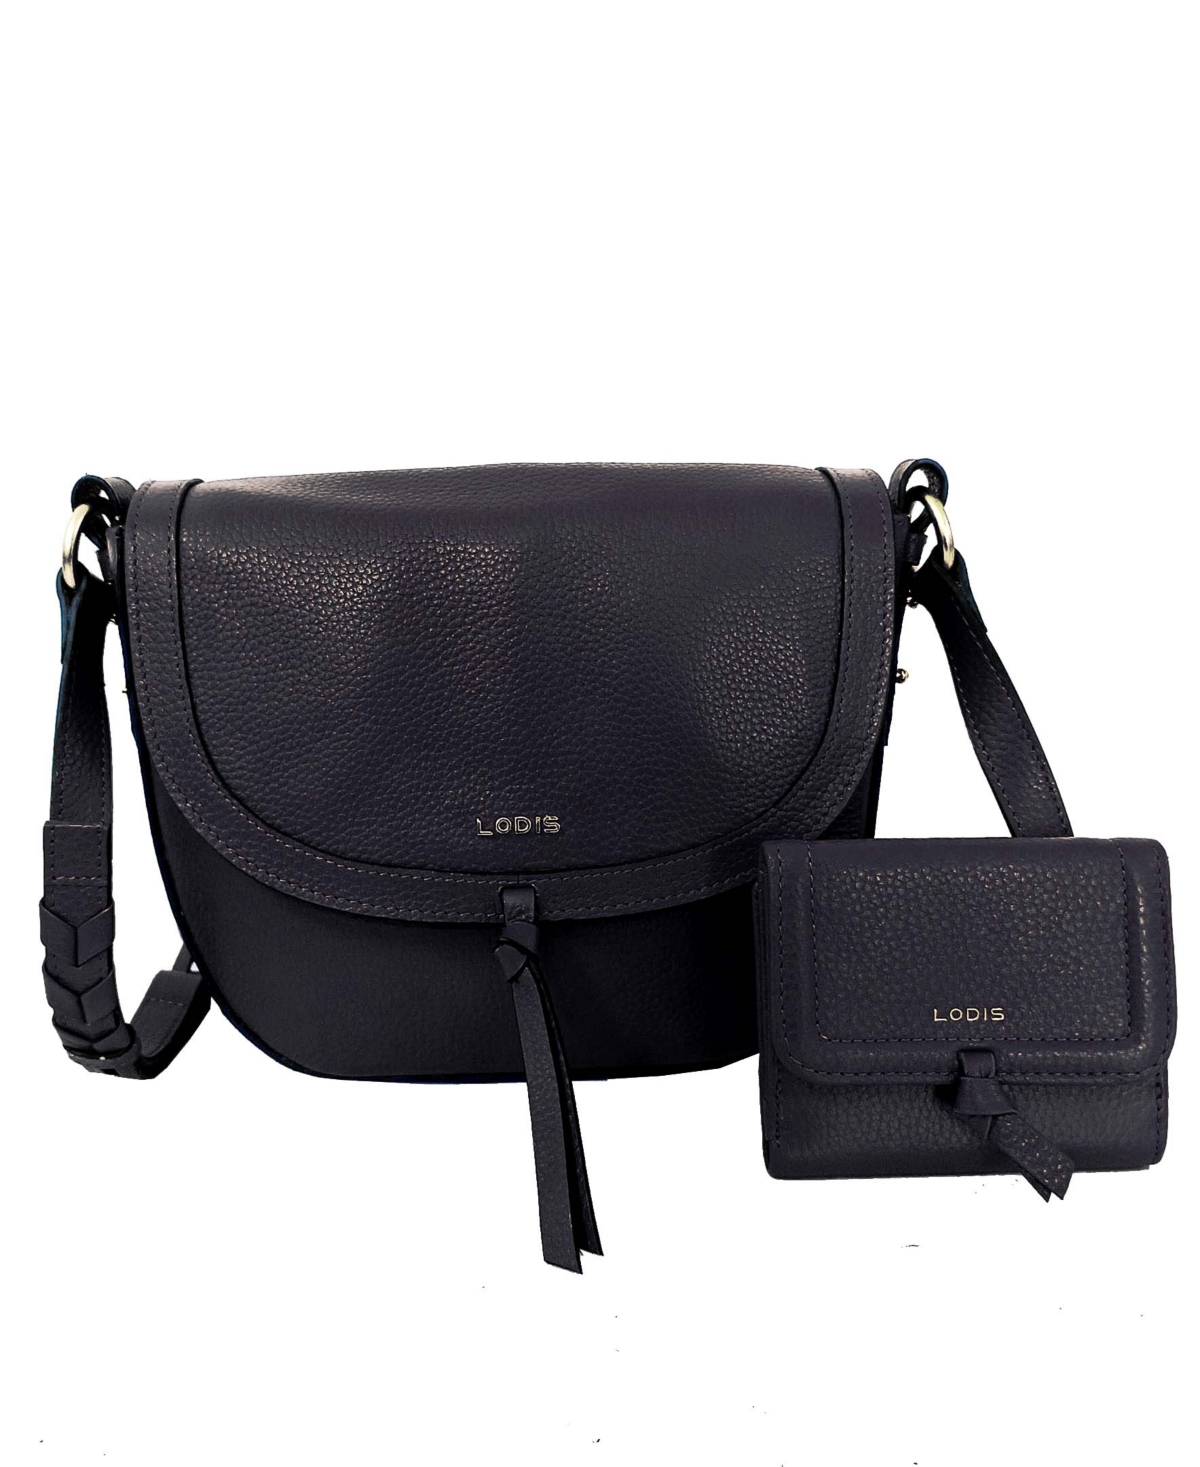 Lodis Women's Ellia Leather Crossbody Bag With Matching Wallet Set, 2 Pieces In Black